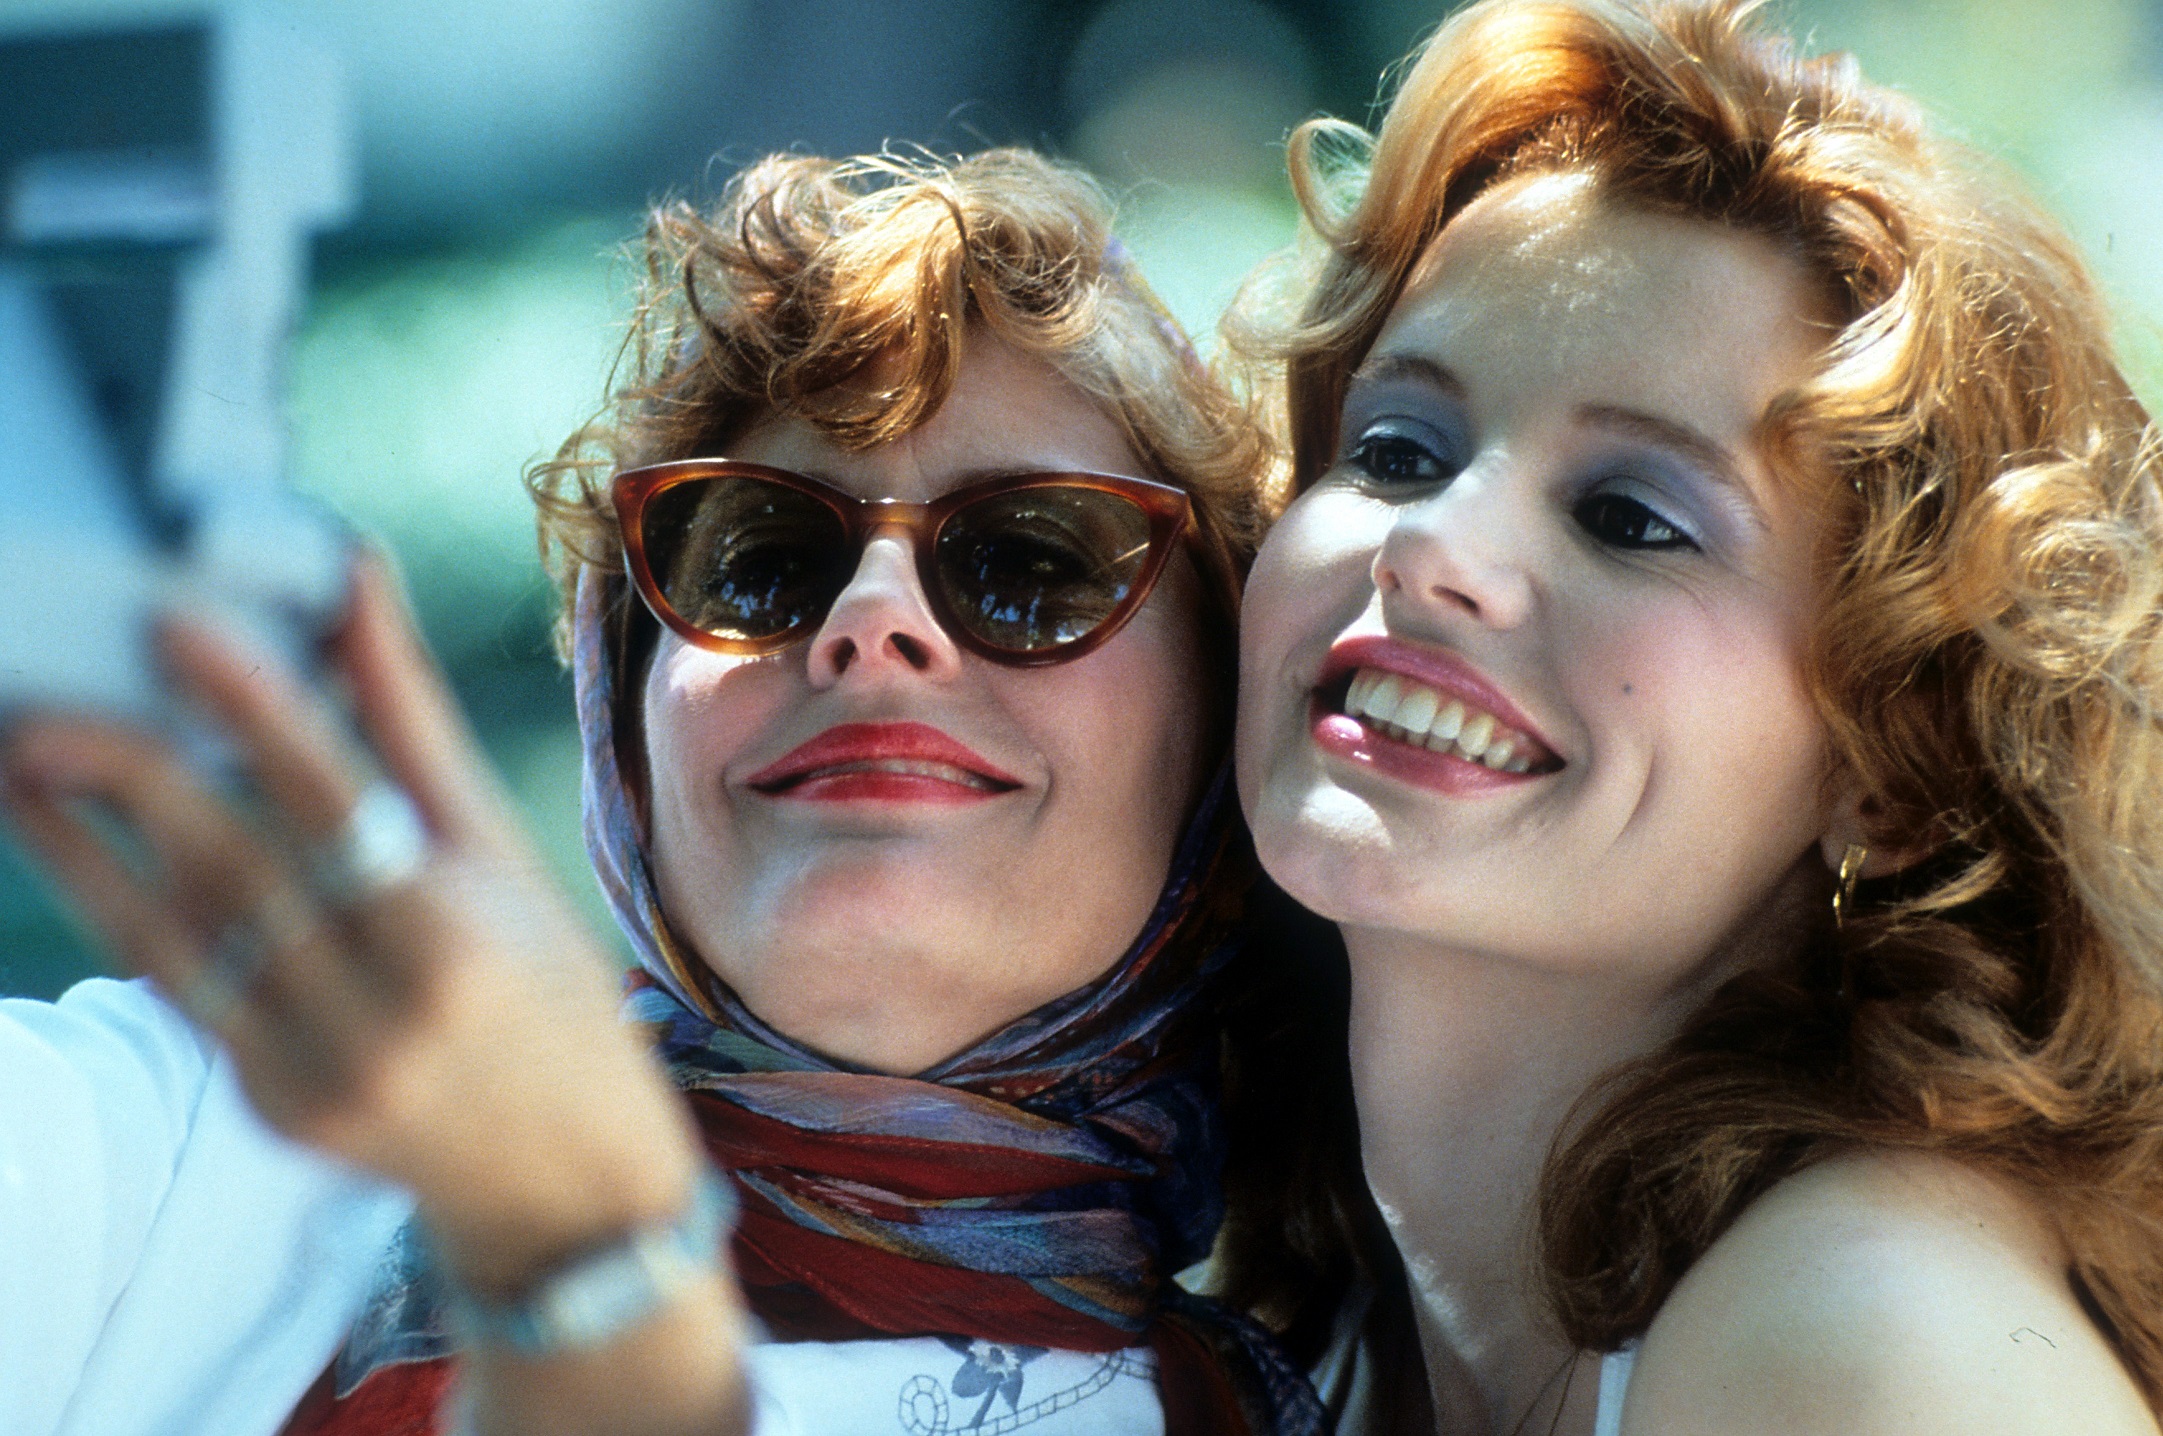 The film Thelma and Louise, about female friendship